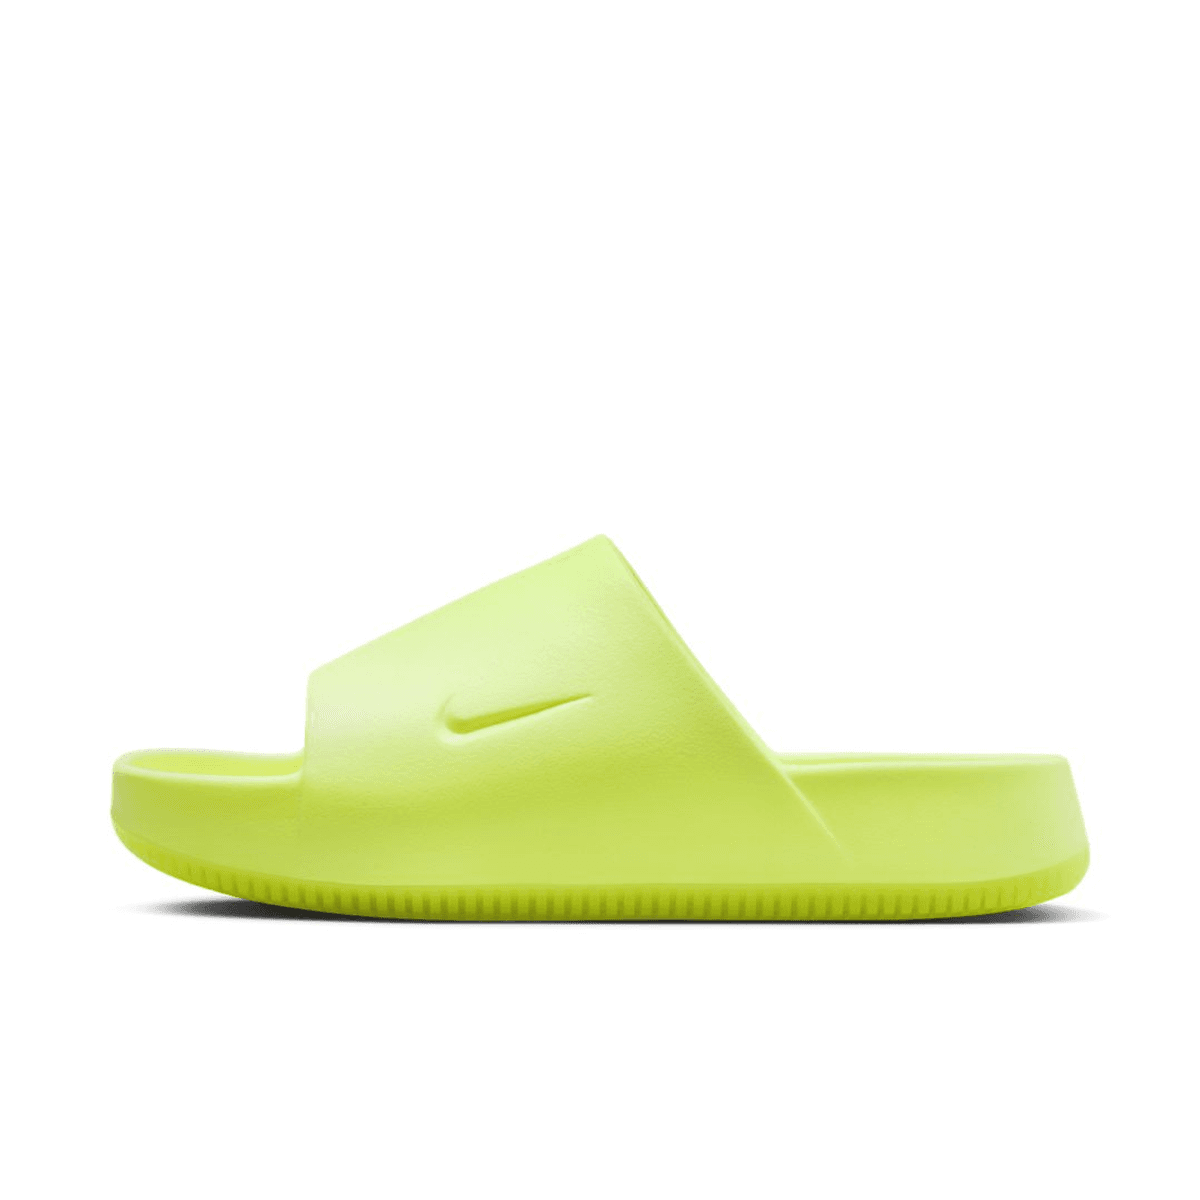 The Nike Calm Slide "Volt" Releases This Fall/Winter Season